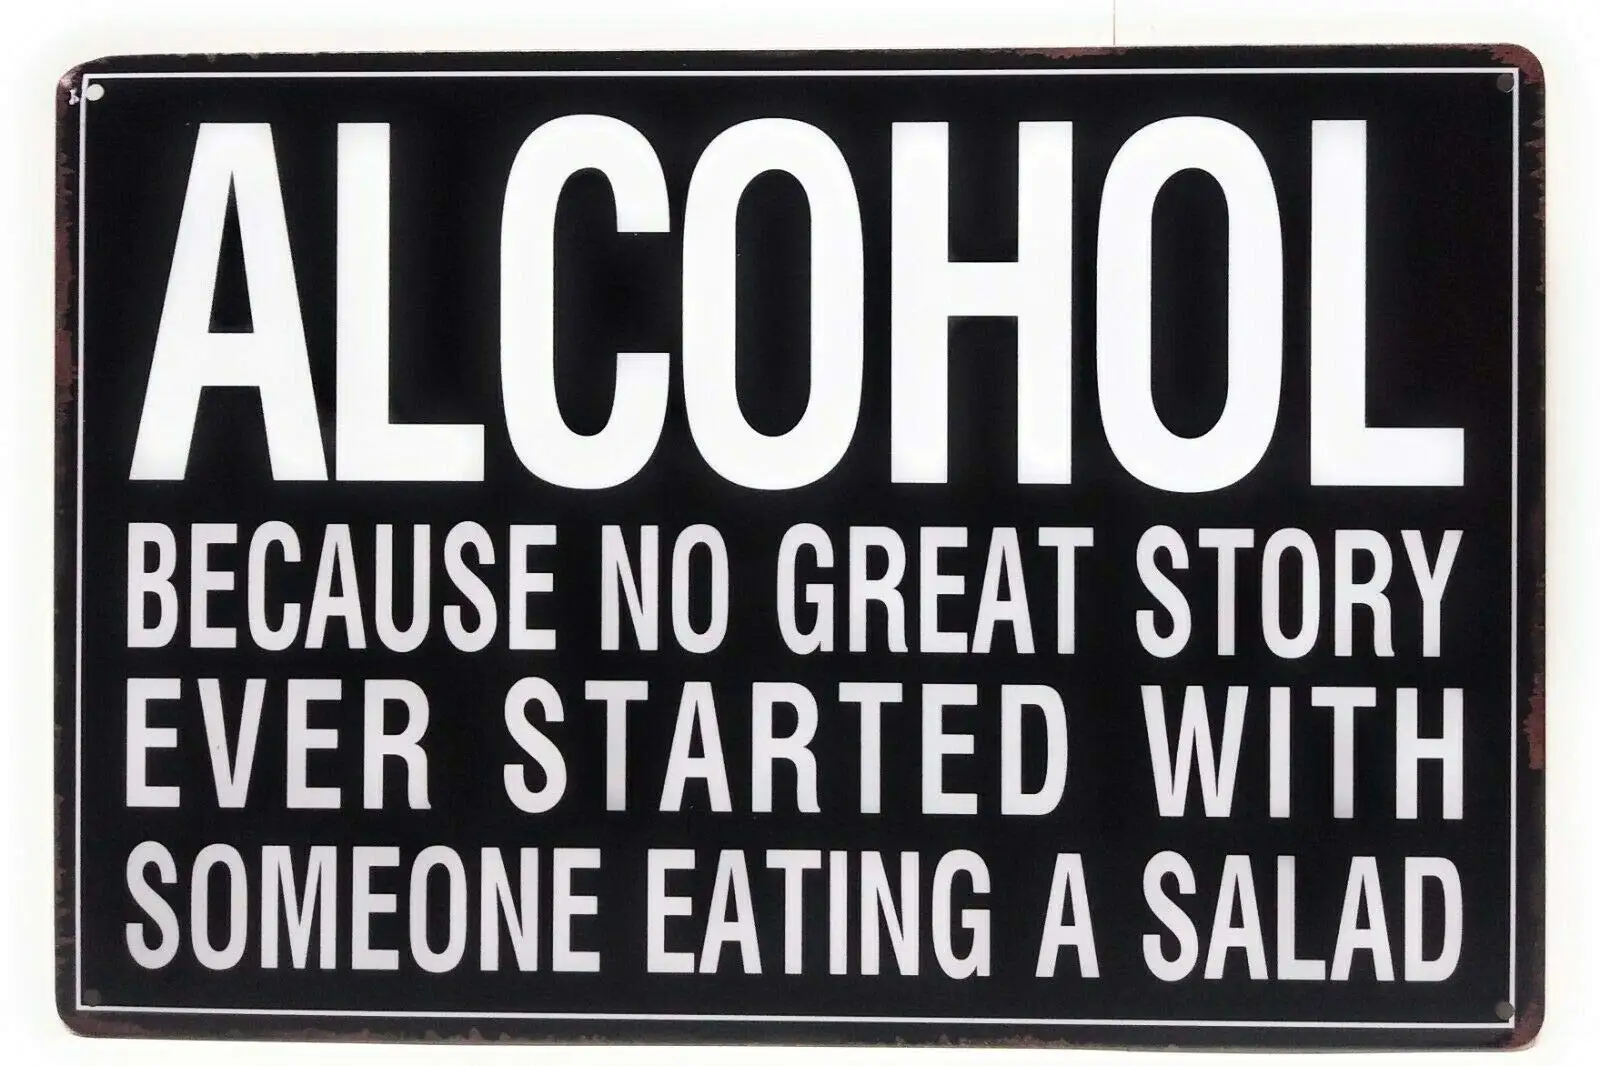 

SLALL Alcohol Because No Great Story Ever Started with Someone Eating A Salad Retro Street Sign Household Metal Tin Sign Bar Caf